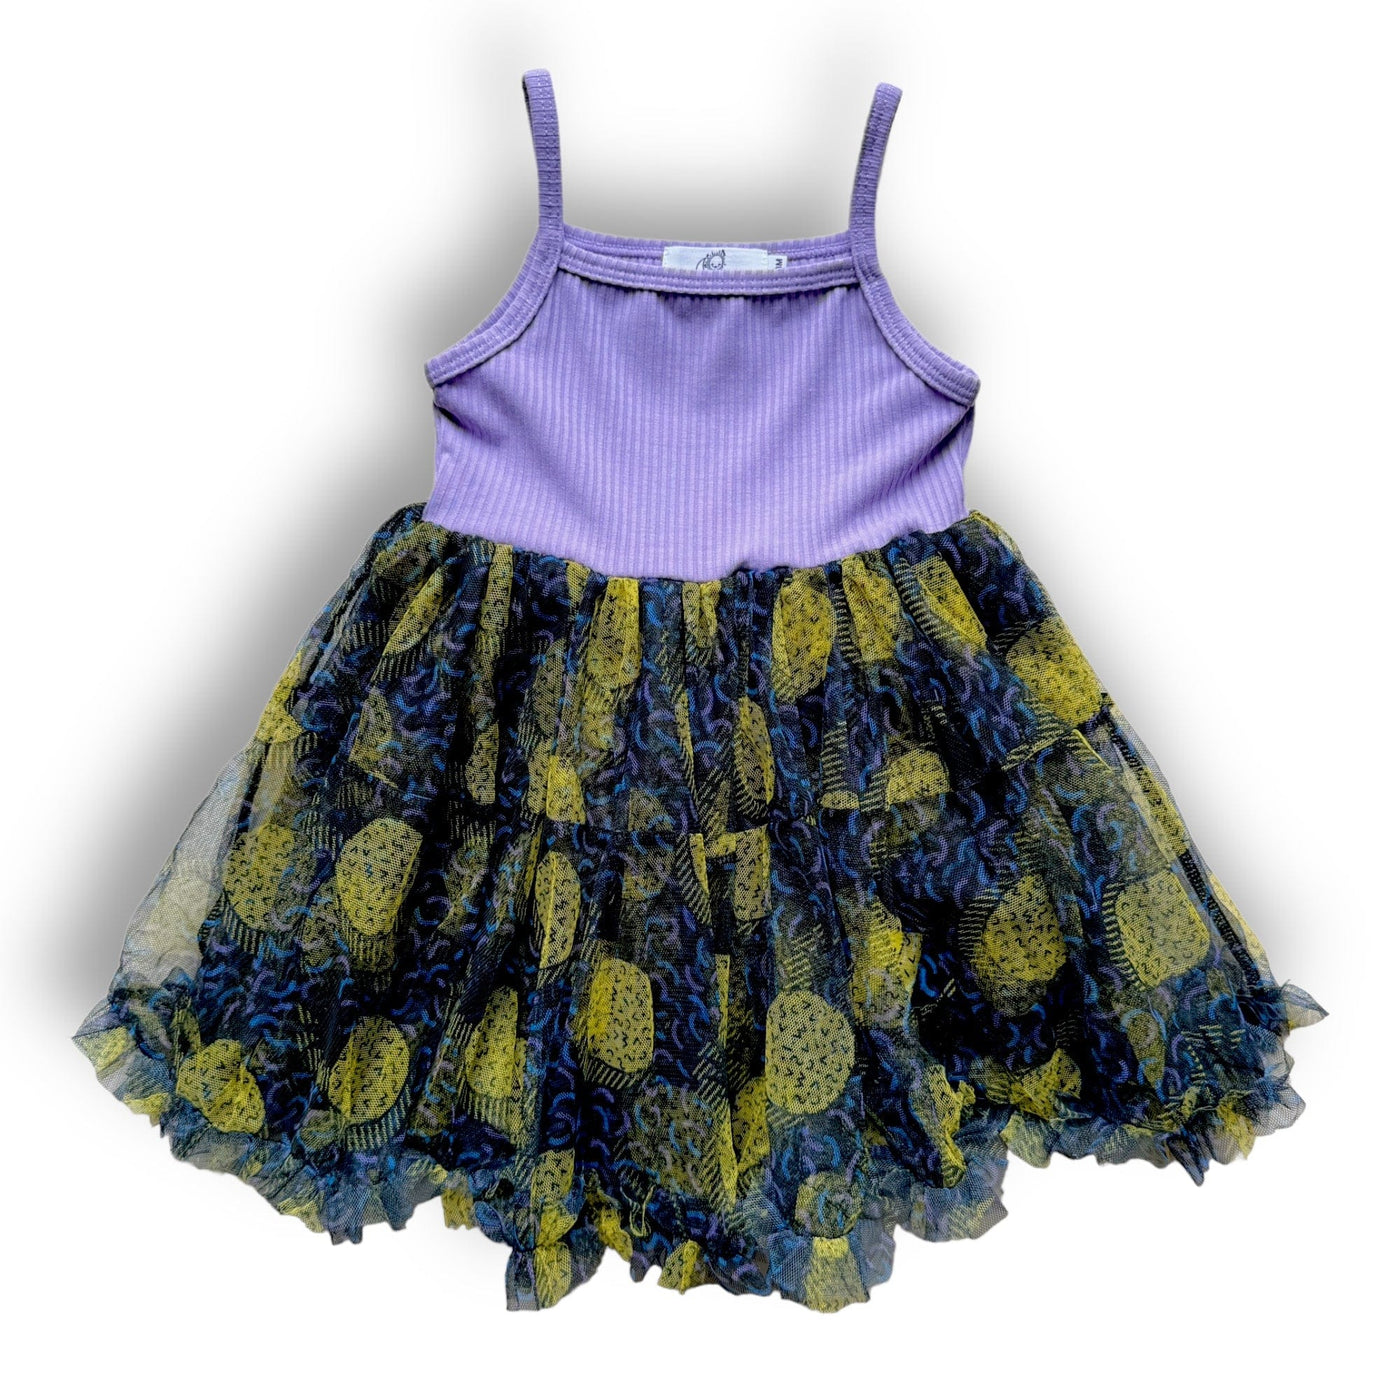 Best Day Ever Kids Baby & Toddler Dresses The Big Fluffy Tutu Dress - Pina Cool-ada buy online boutique kids clothing